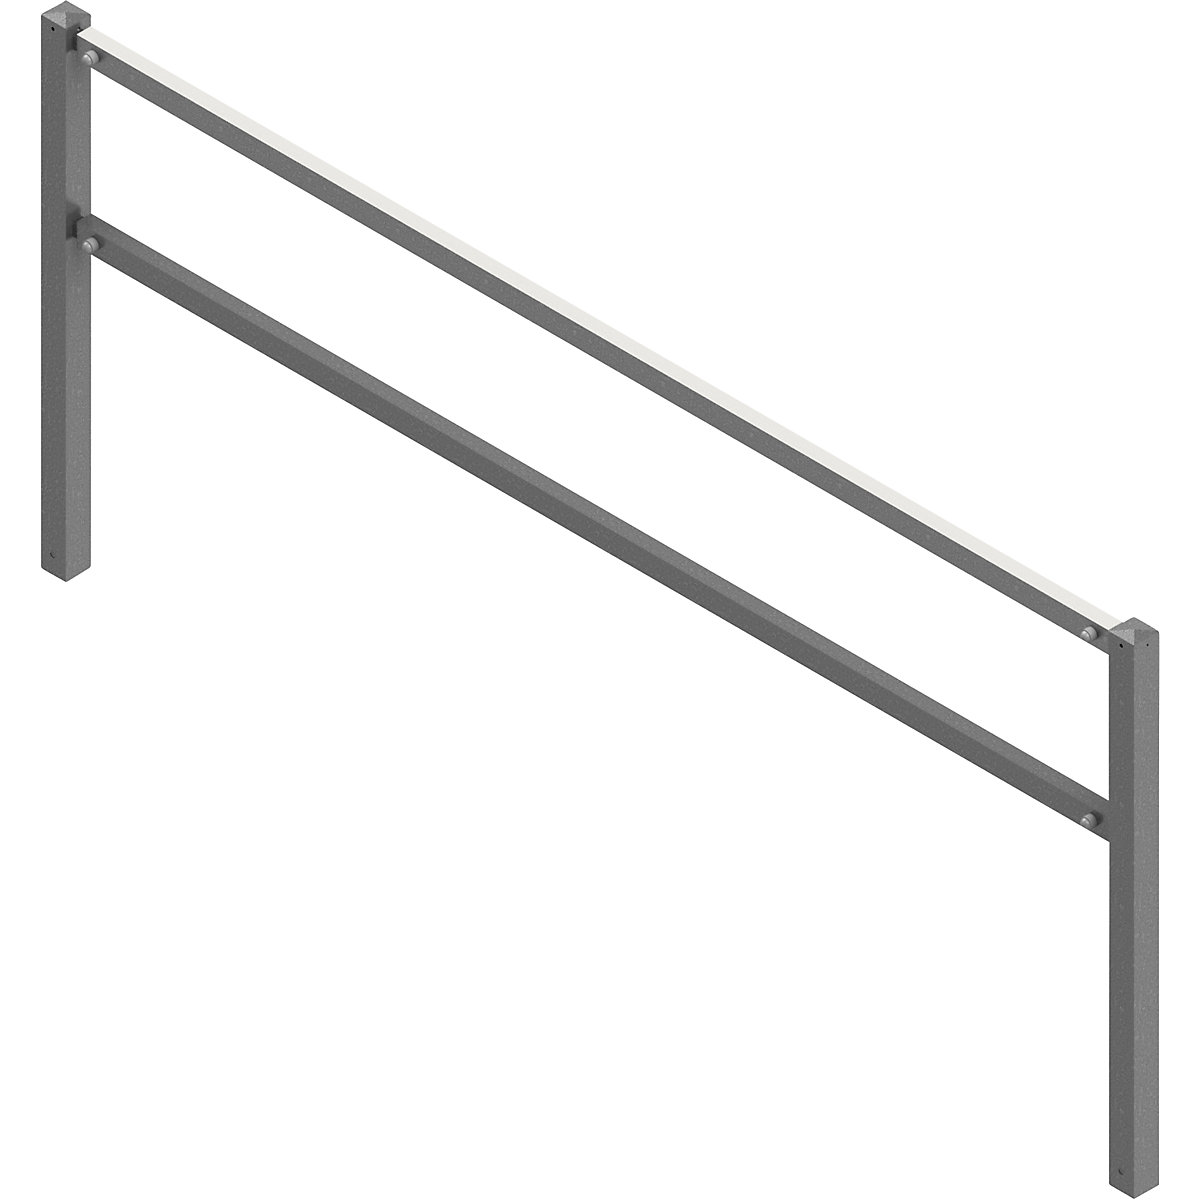 Access barrier, bolt-together, with top rail and knee rail, hot dip galvanised, width 2500 mm-2